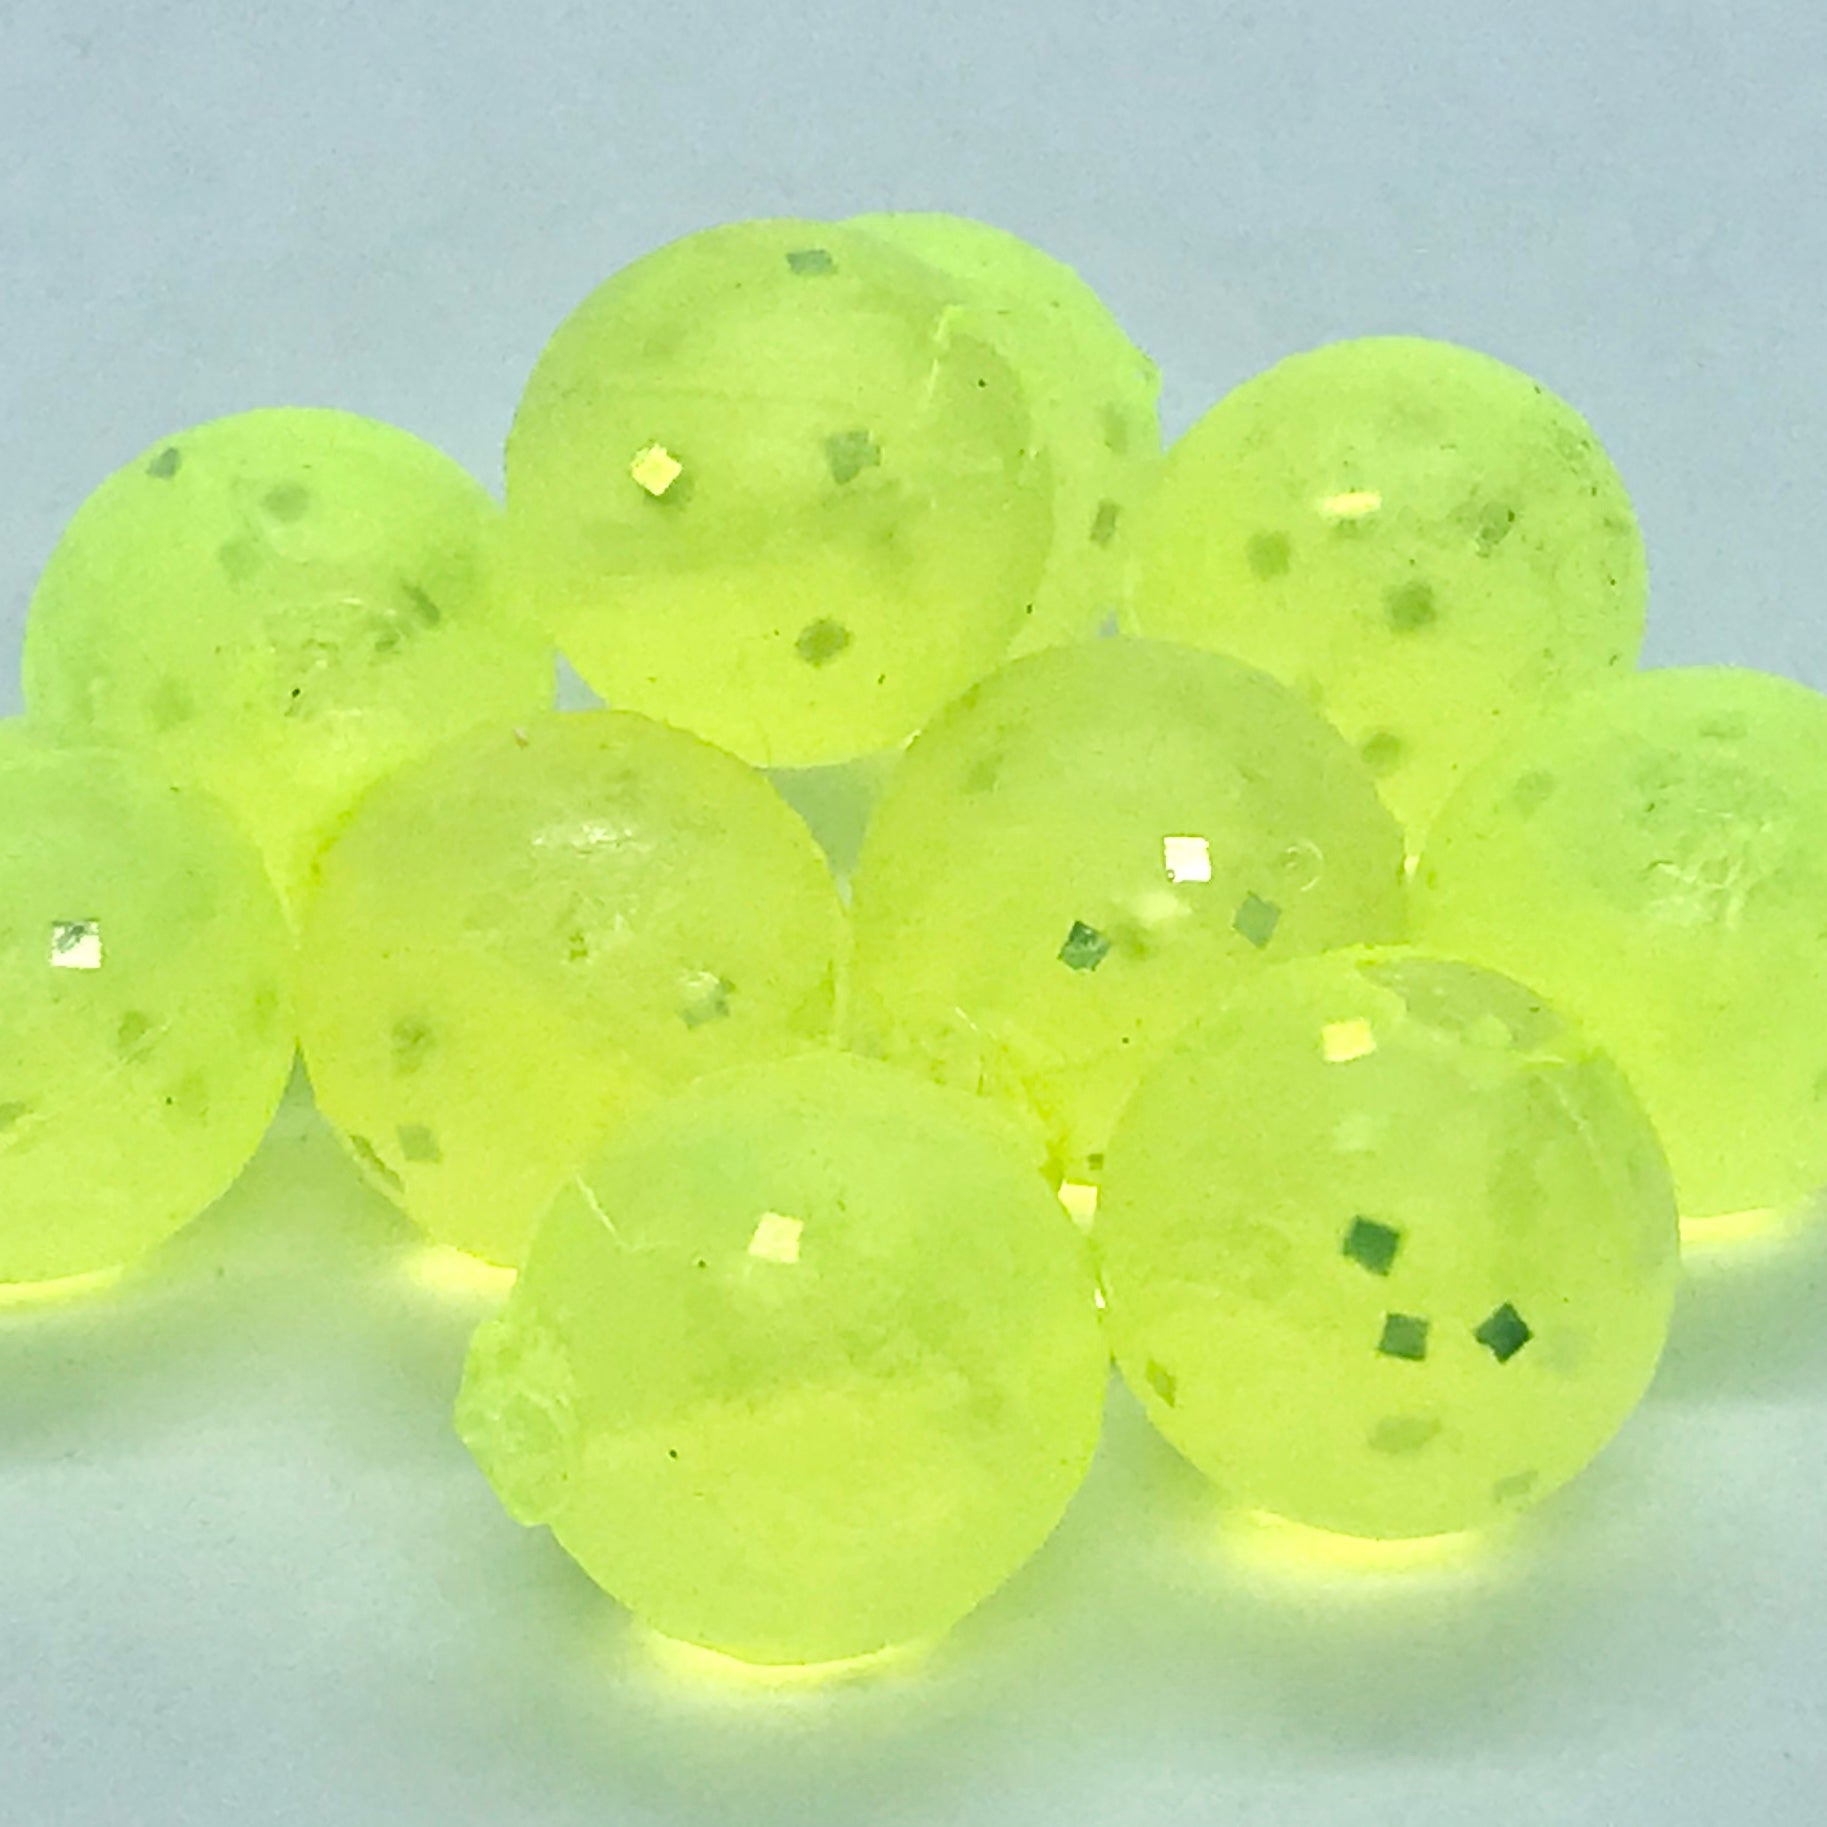 BnR Tackle 10mm Soft Beads 10 pack — Discount Tackle